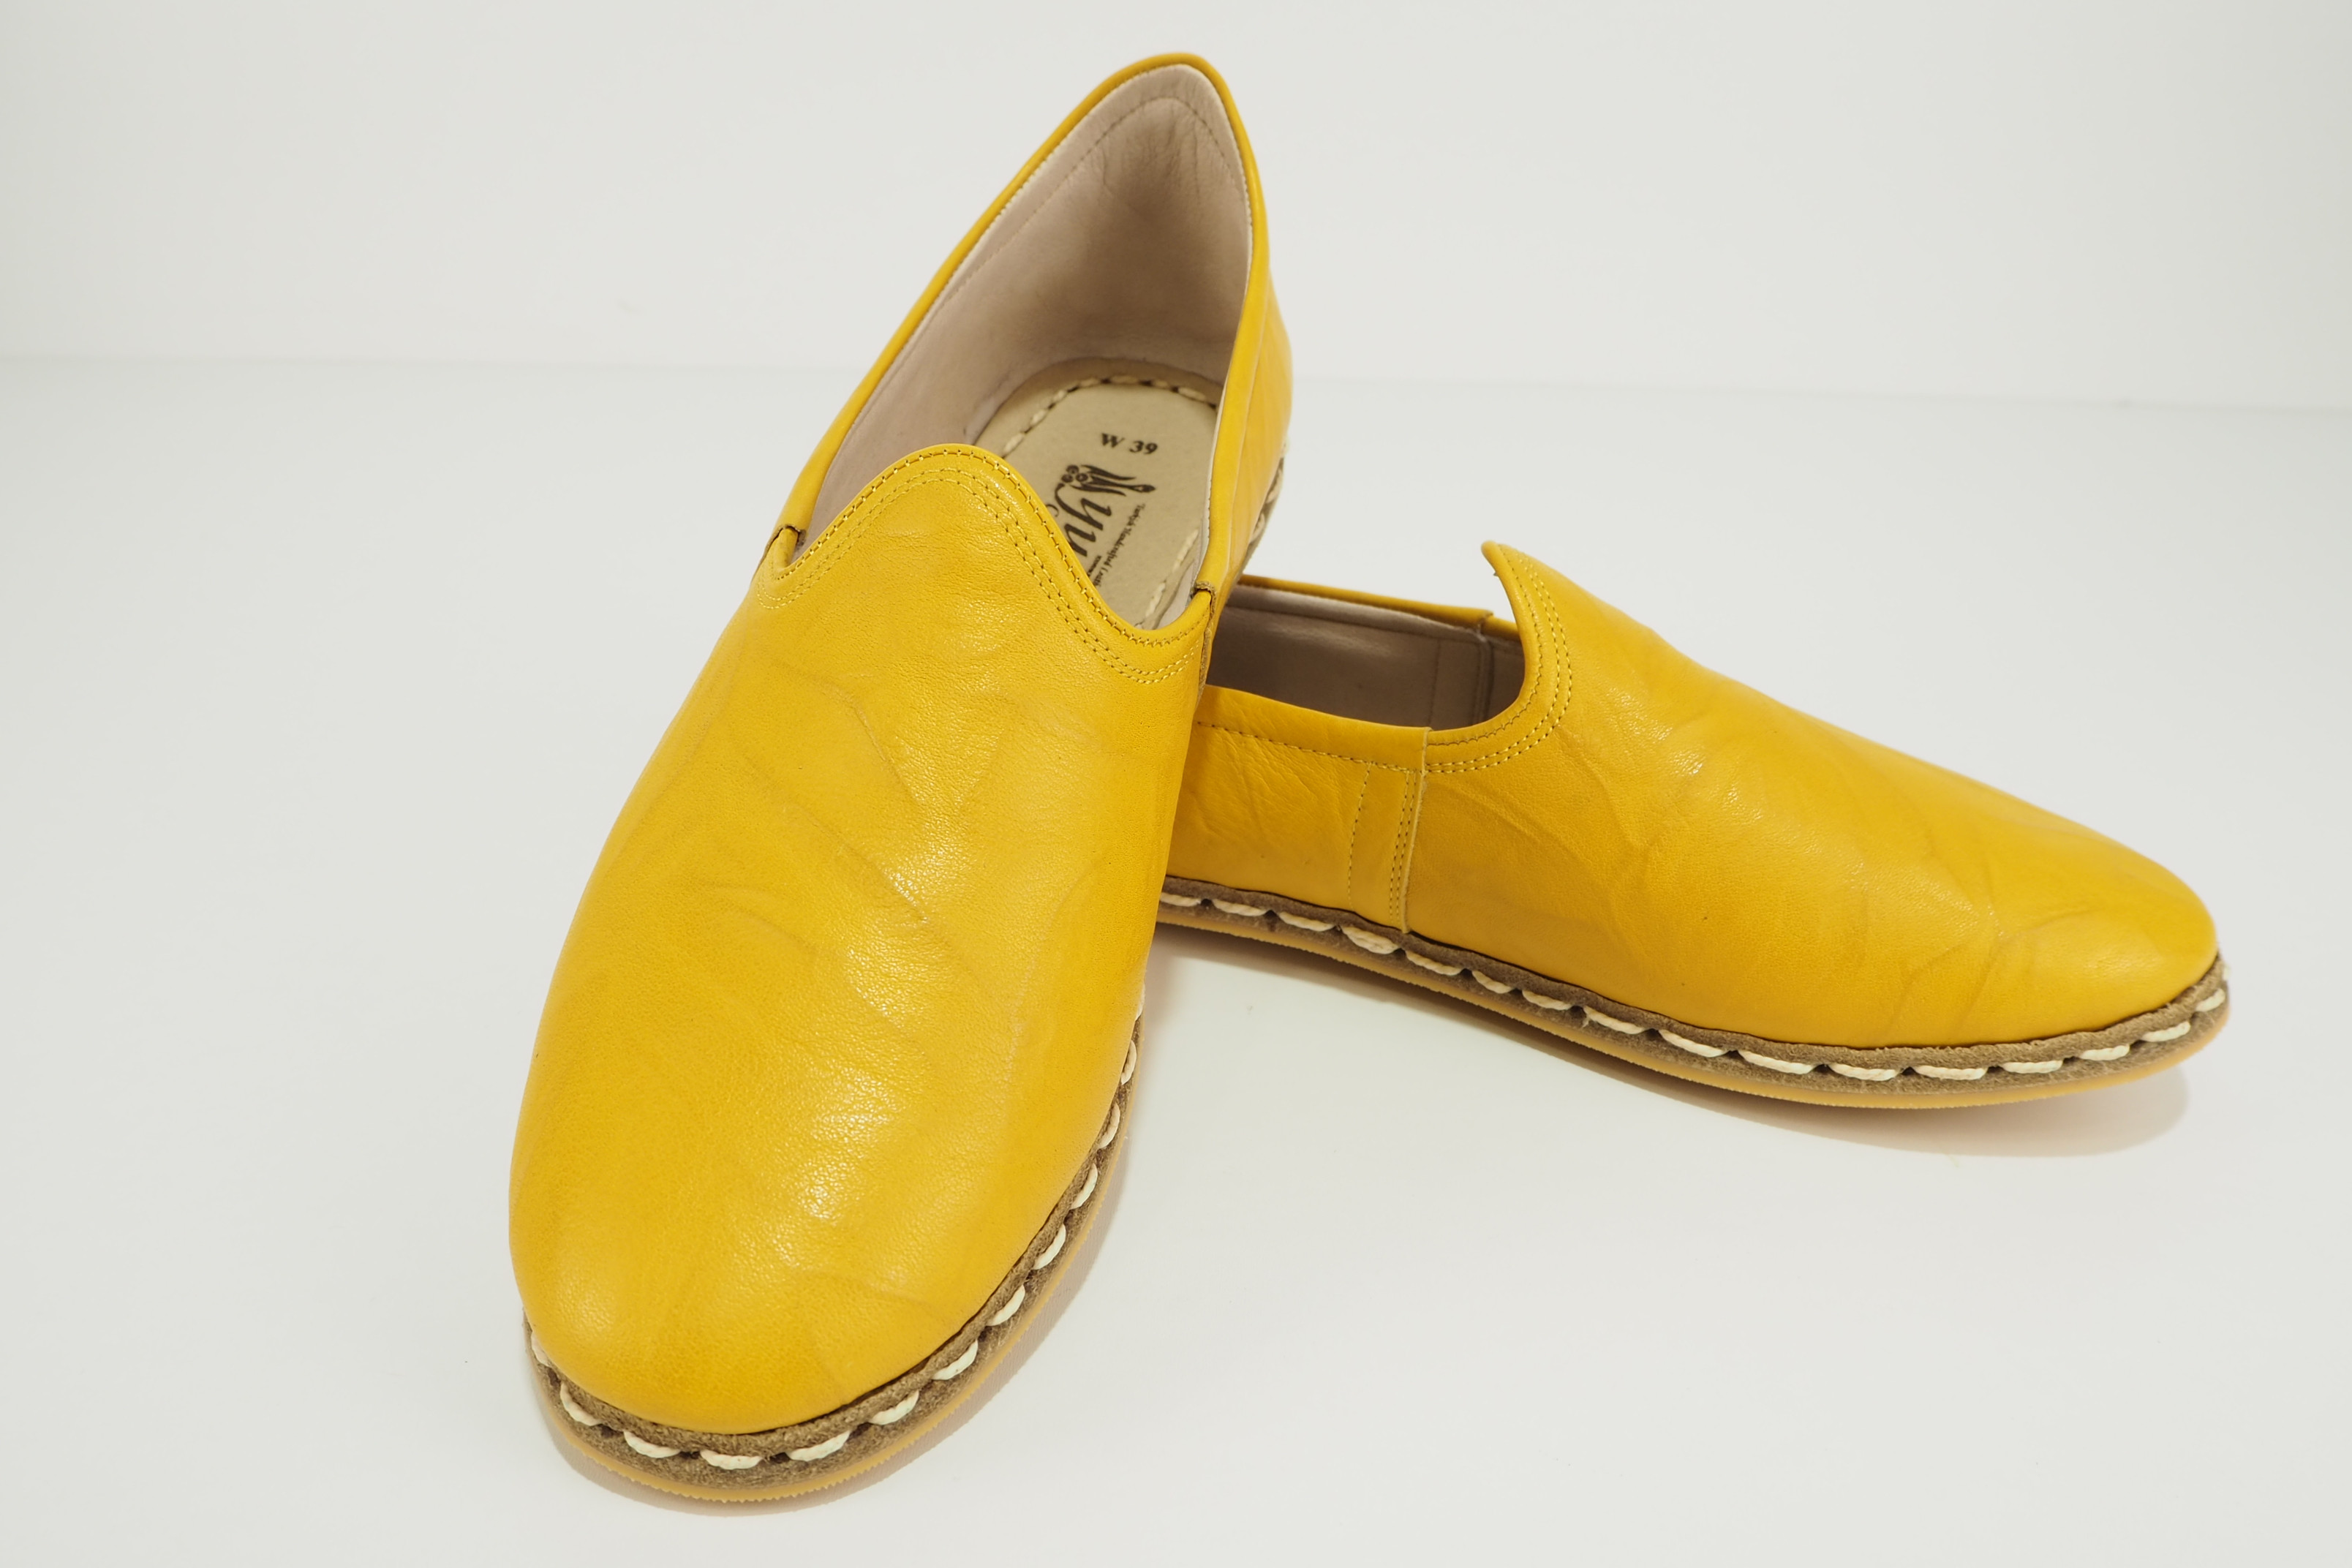 Turkish Flats Shoes Travel Shoes Men/'s Handmade Yemeni Shoes Light Blue Leather Summer Loafers